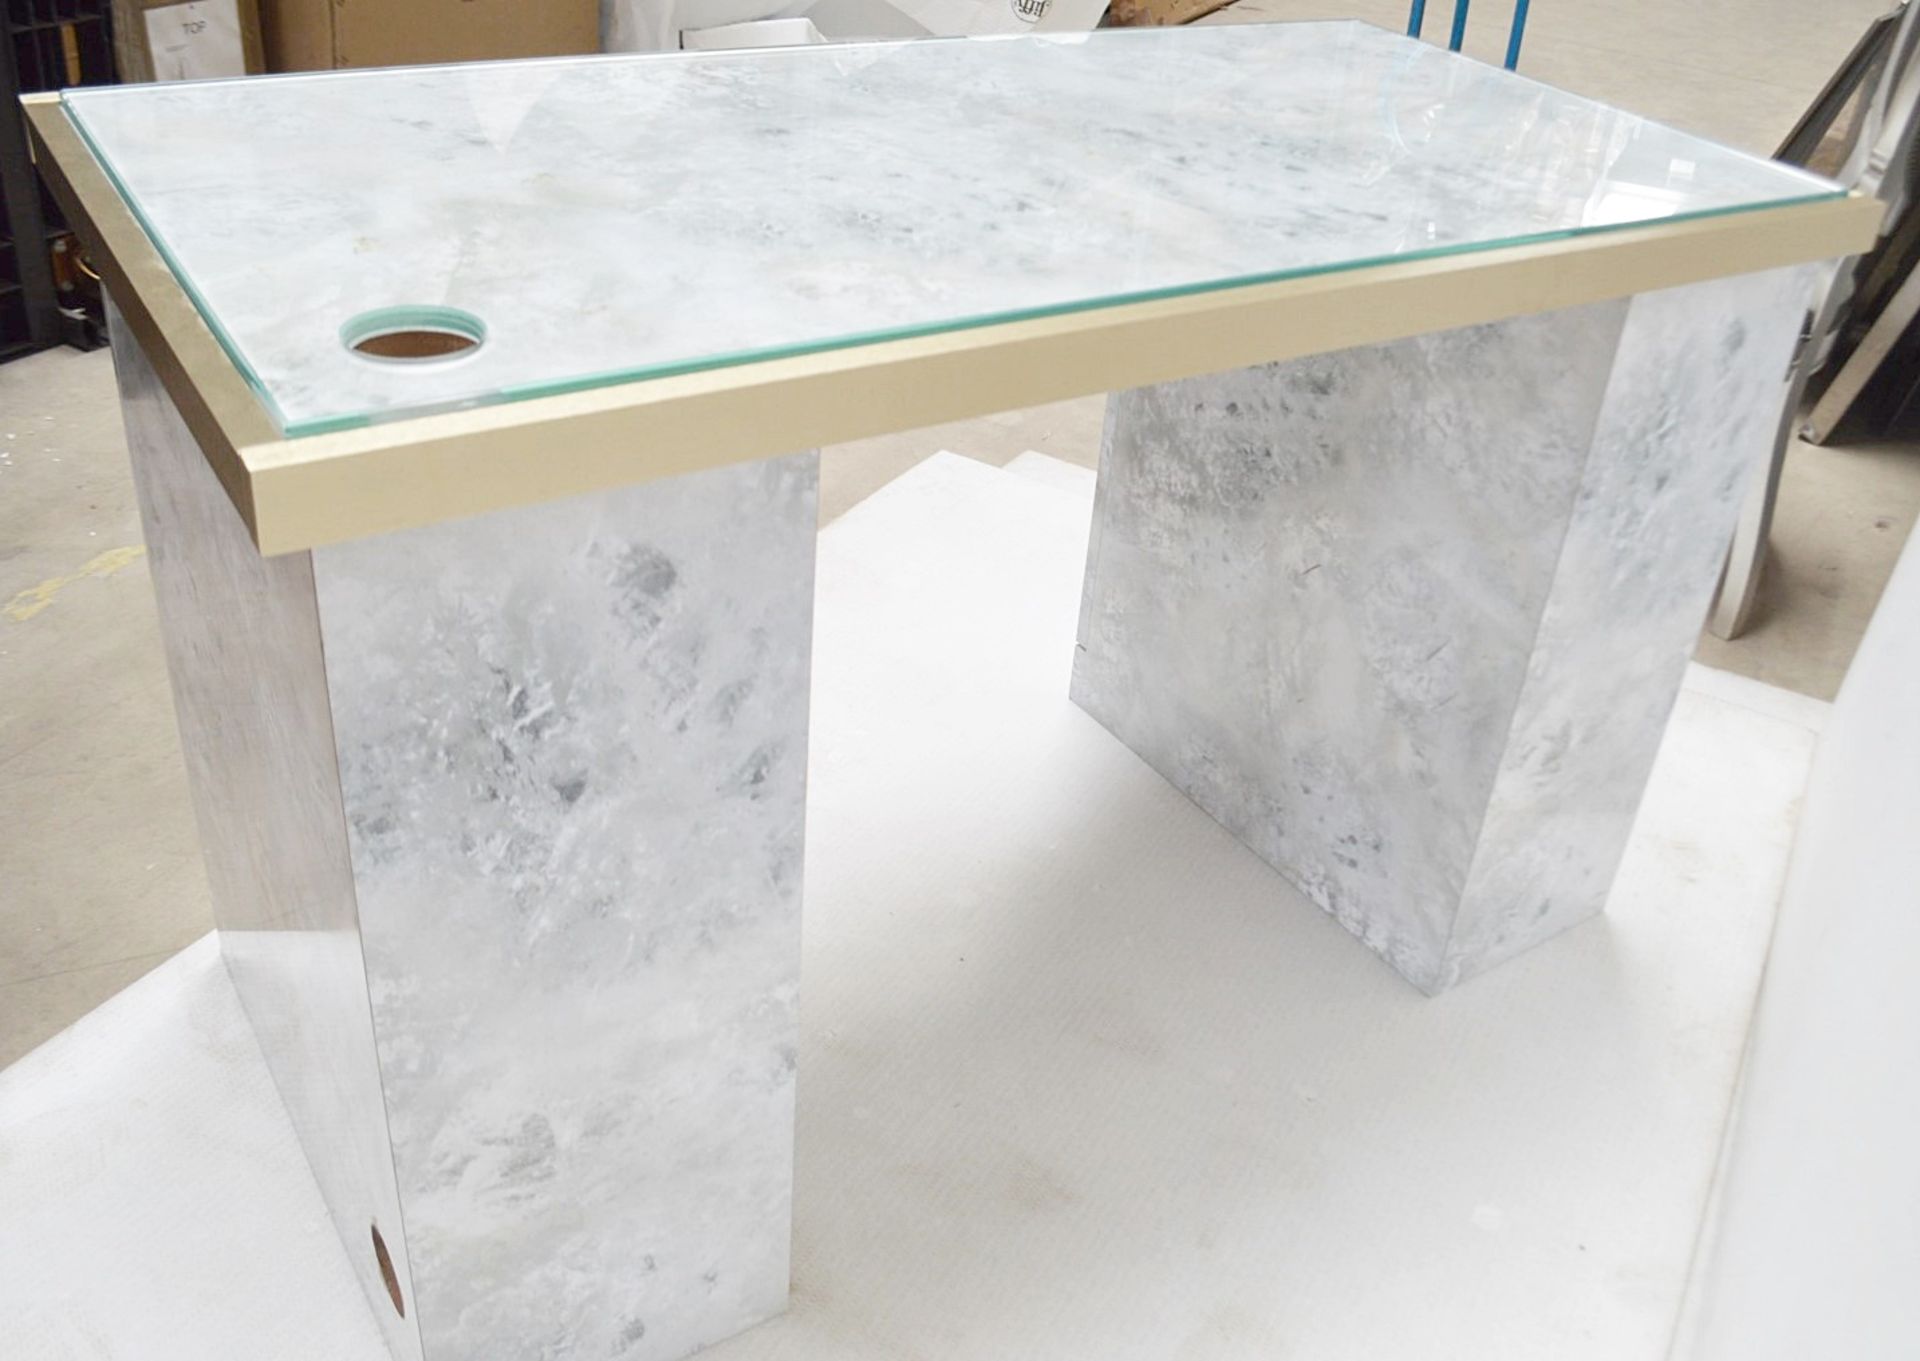 1 x BALDI Designer Retail Display Table / Desk Featuring A Marble Effect Aesthetic - Image 2 of 8